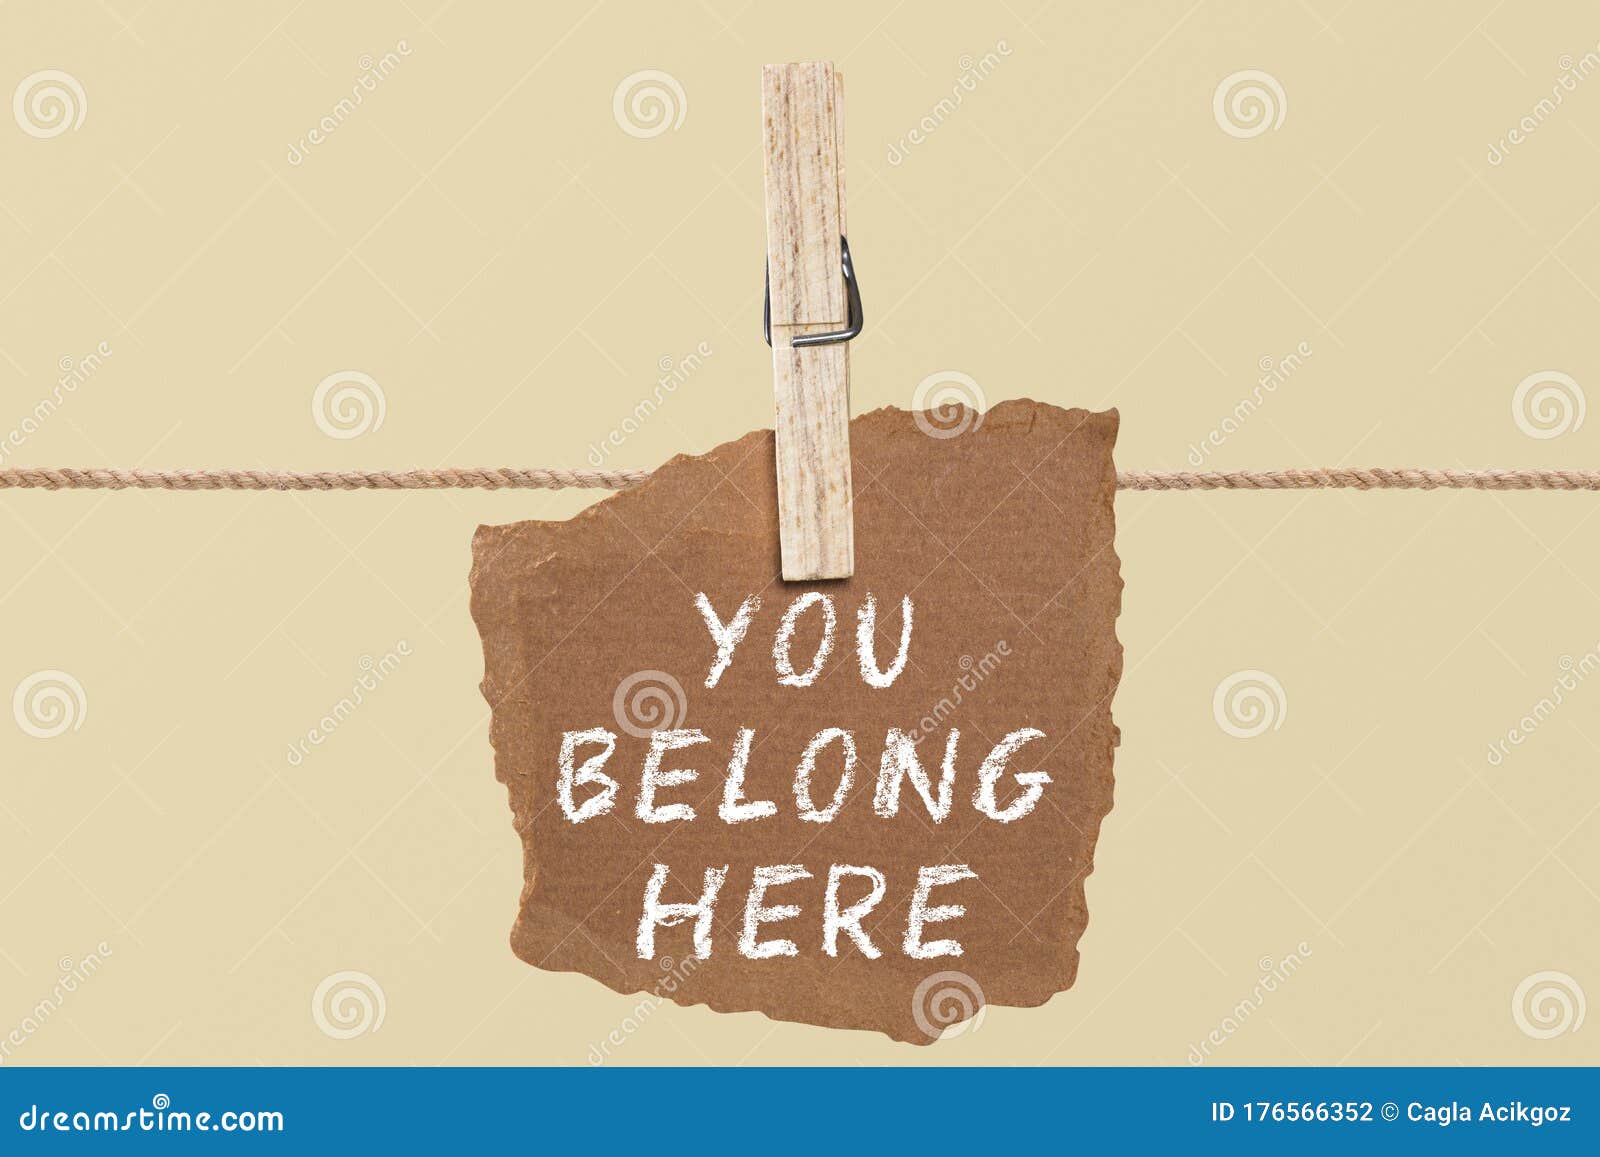 you belong here    a paper on the pegs. and this is the word written